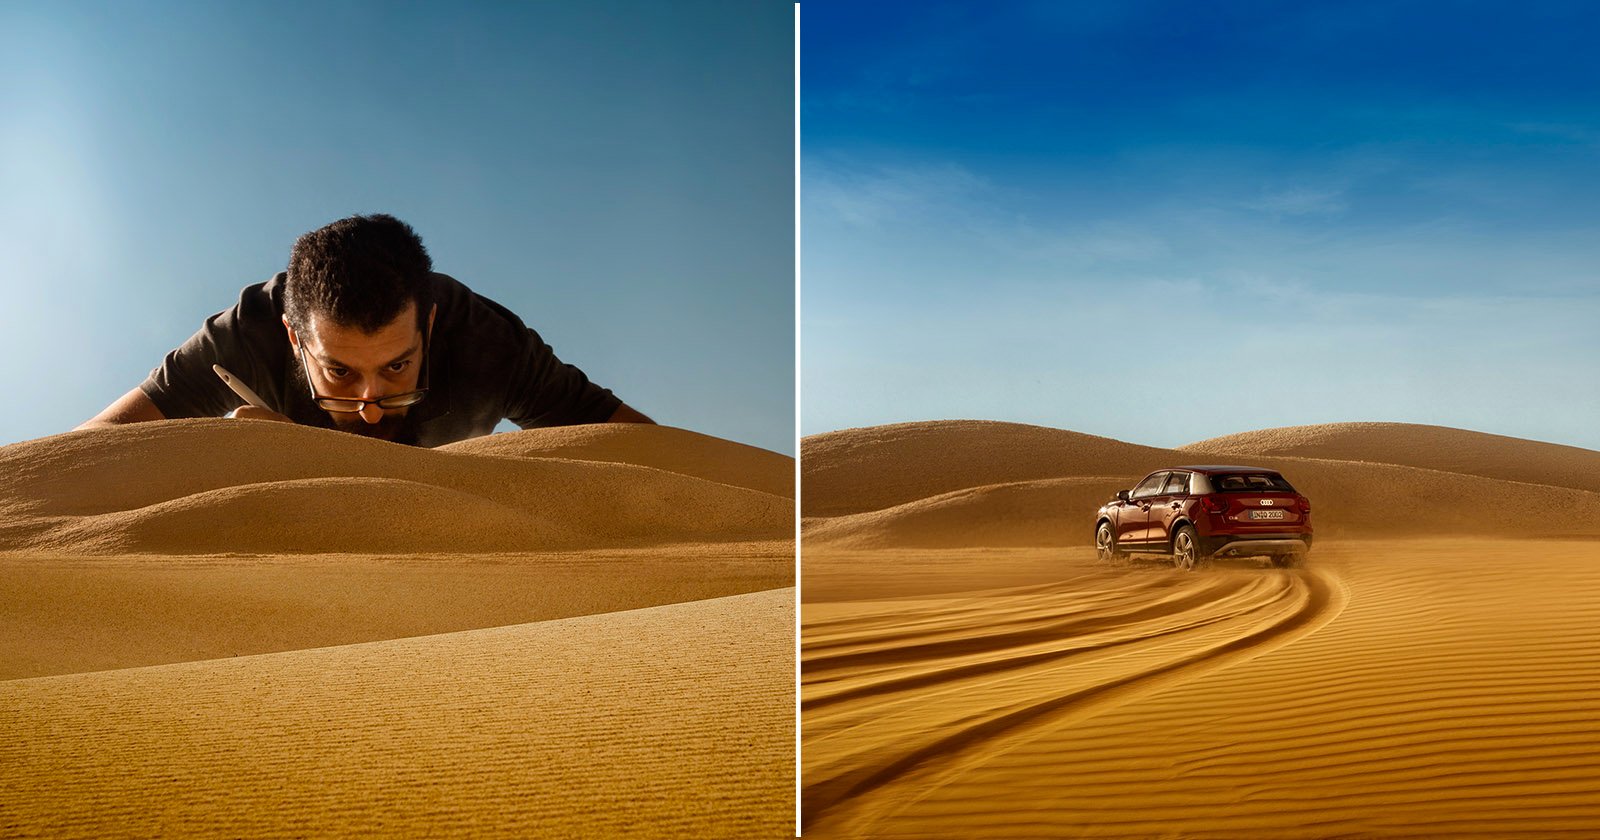 This Audi Ad Was Shot Using 1/43 Scale Models and a Homemade Desert